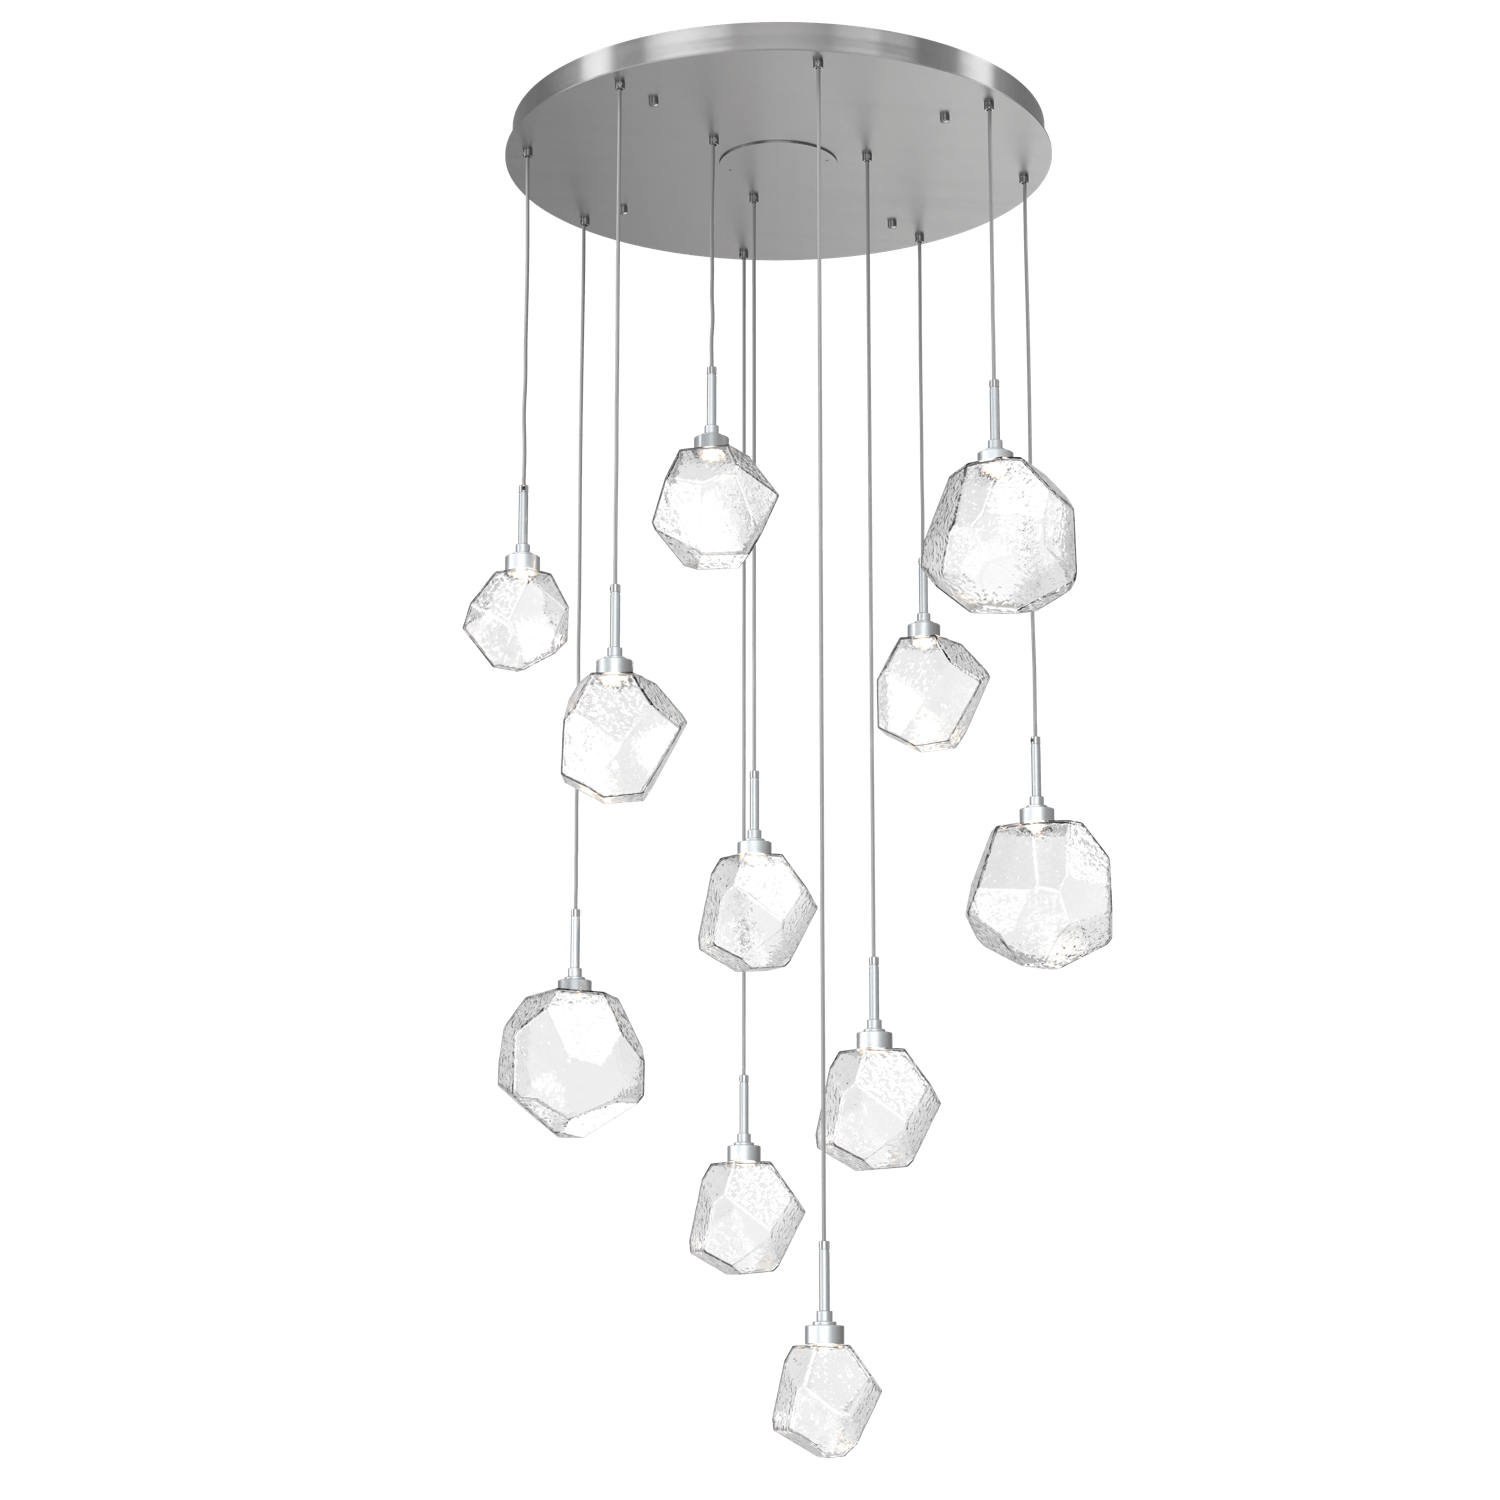 CHB0039-11-SN-C-Hammerton-Studio-Gem-11-light-round-pendant-chandelier-with-satin-nickel-finish-and-clear-blown-glass-shades-and-LED-lamping